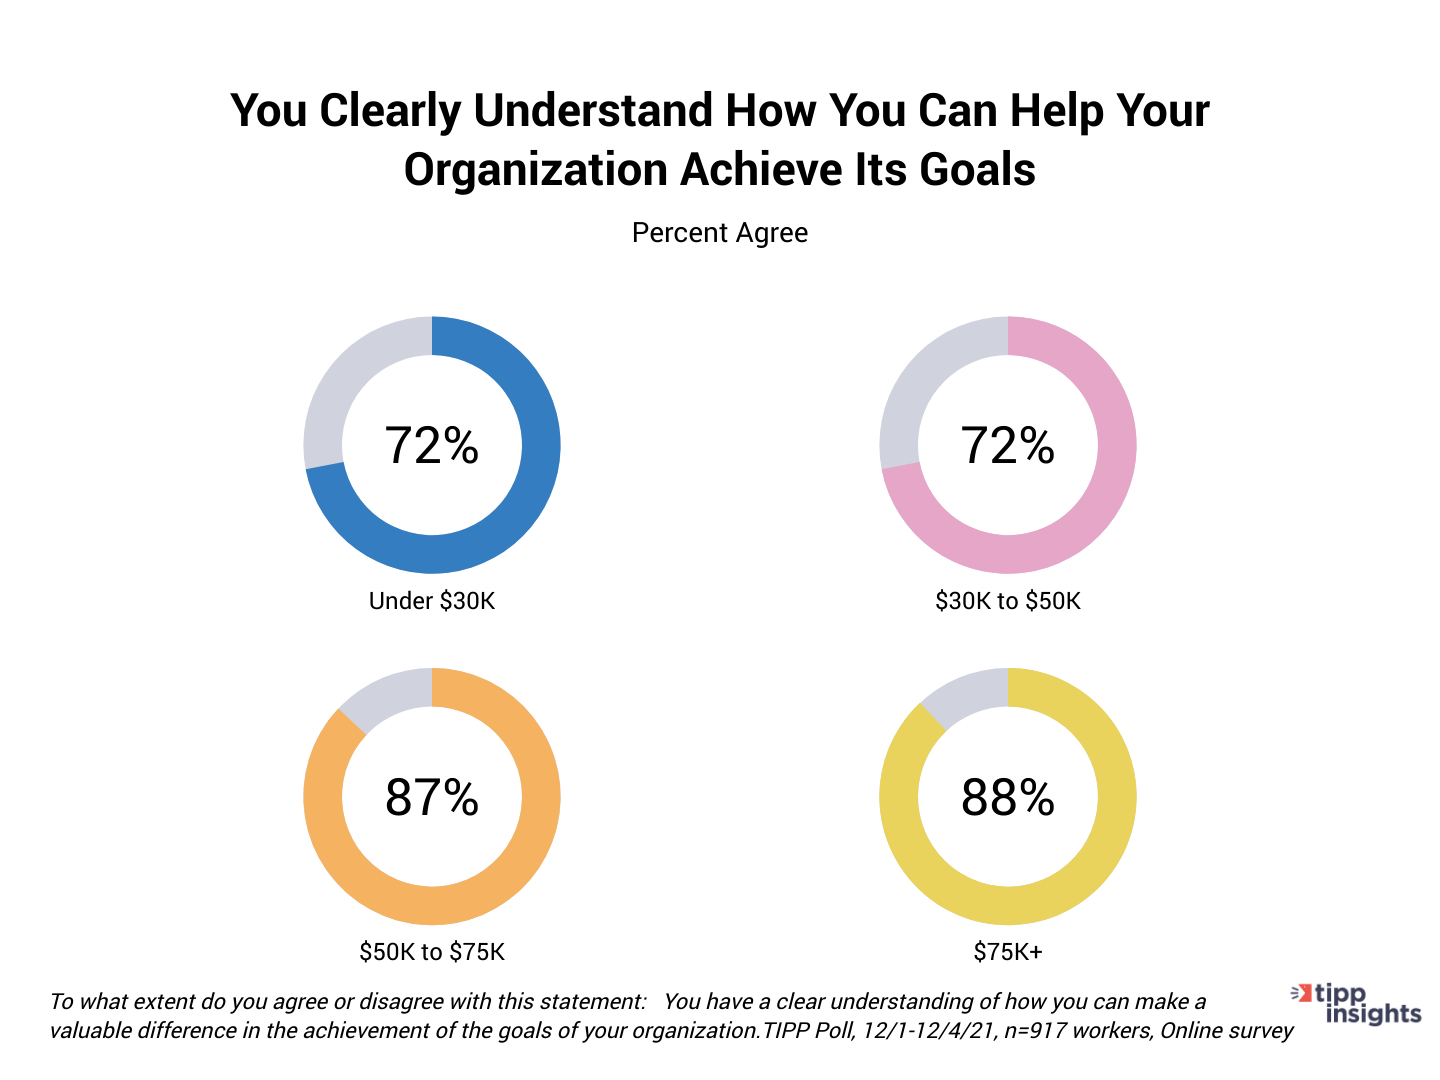 TIPP Poll Results: You clearly understand how you can help your organization achieve goals